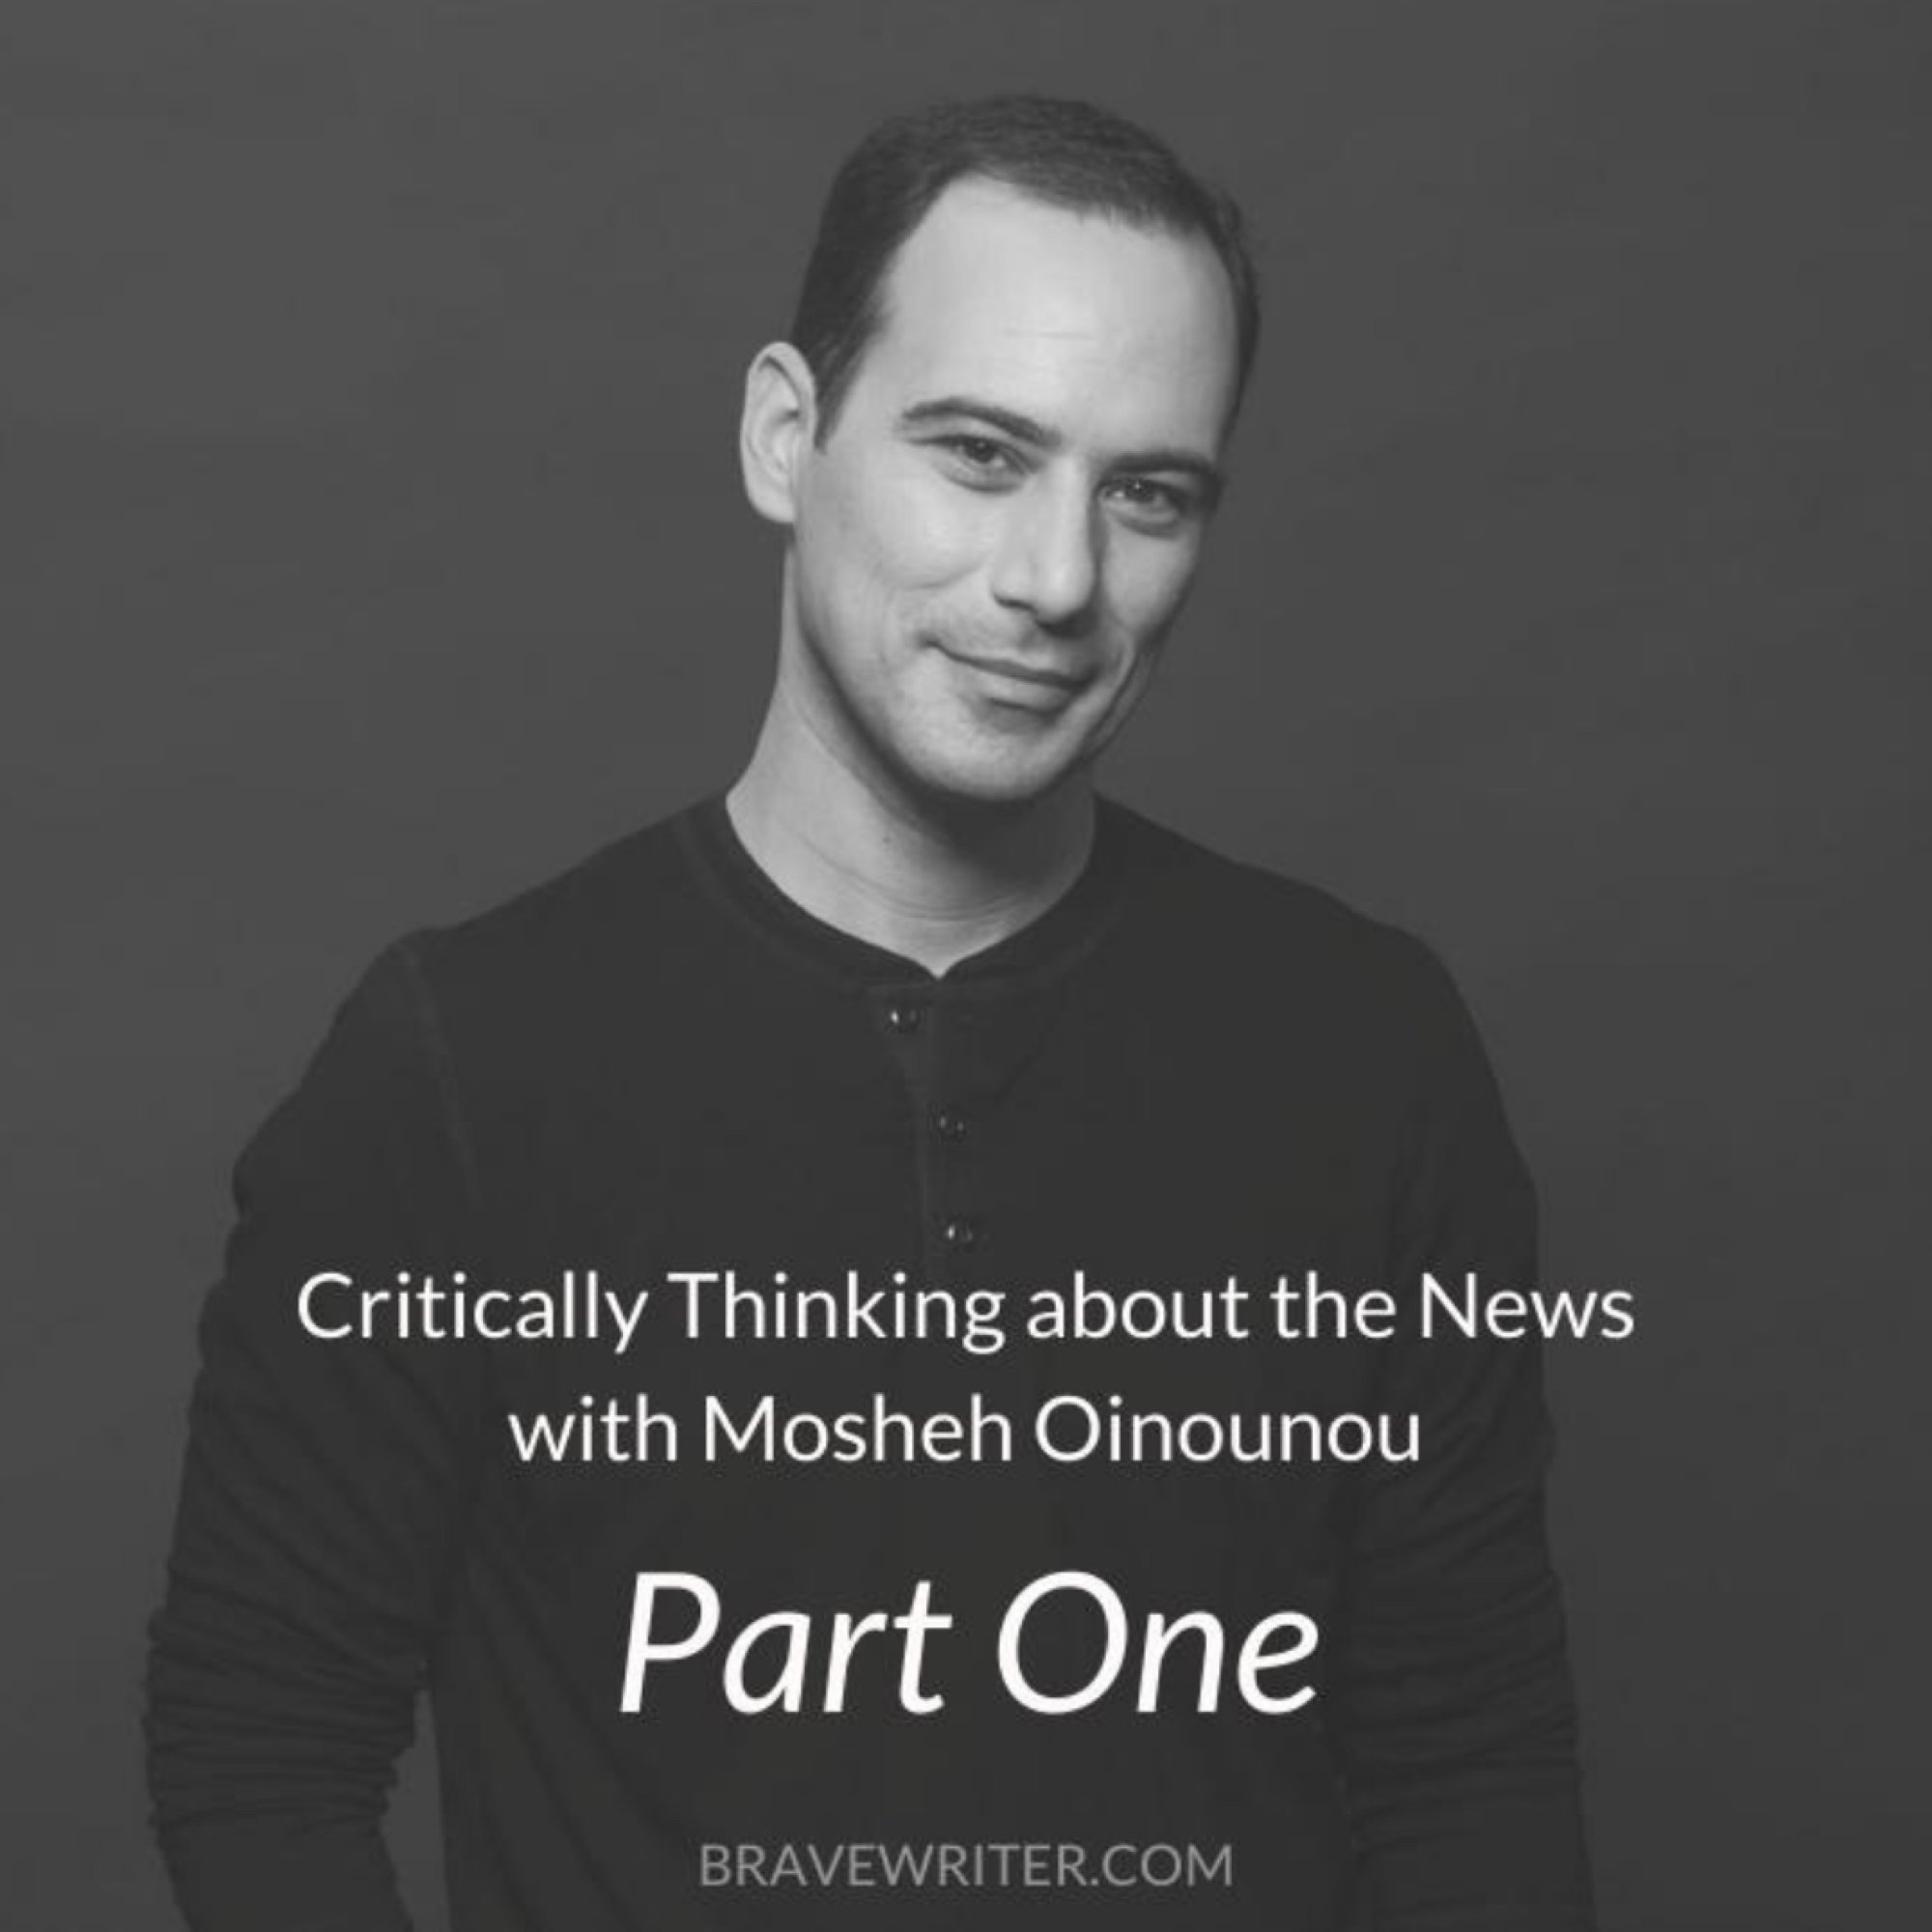 Brave Writer Podcast: Critically Thinking about the News with Mosheh Oinounou, Part 1 